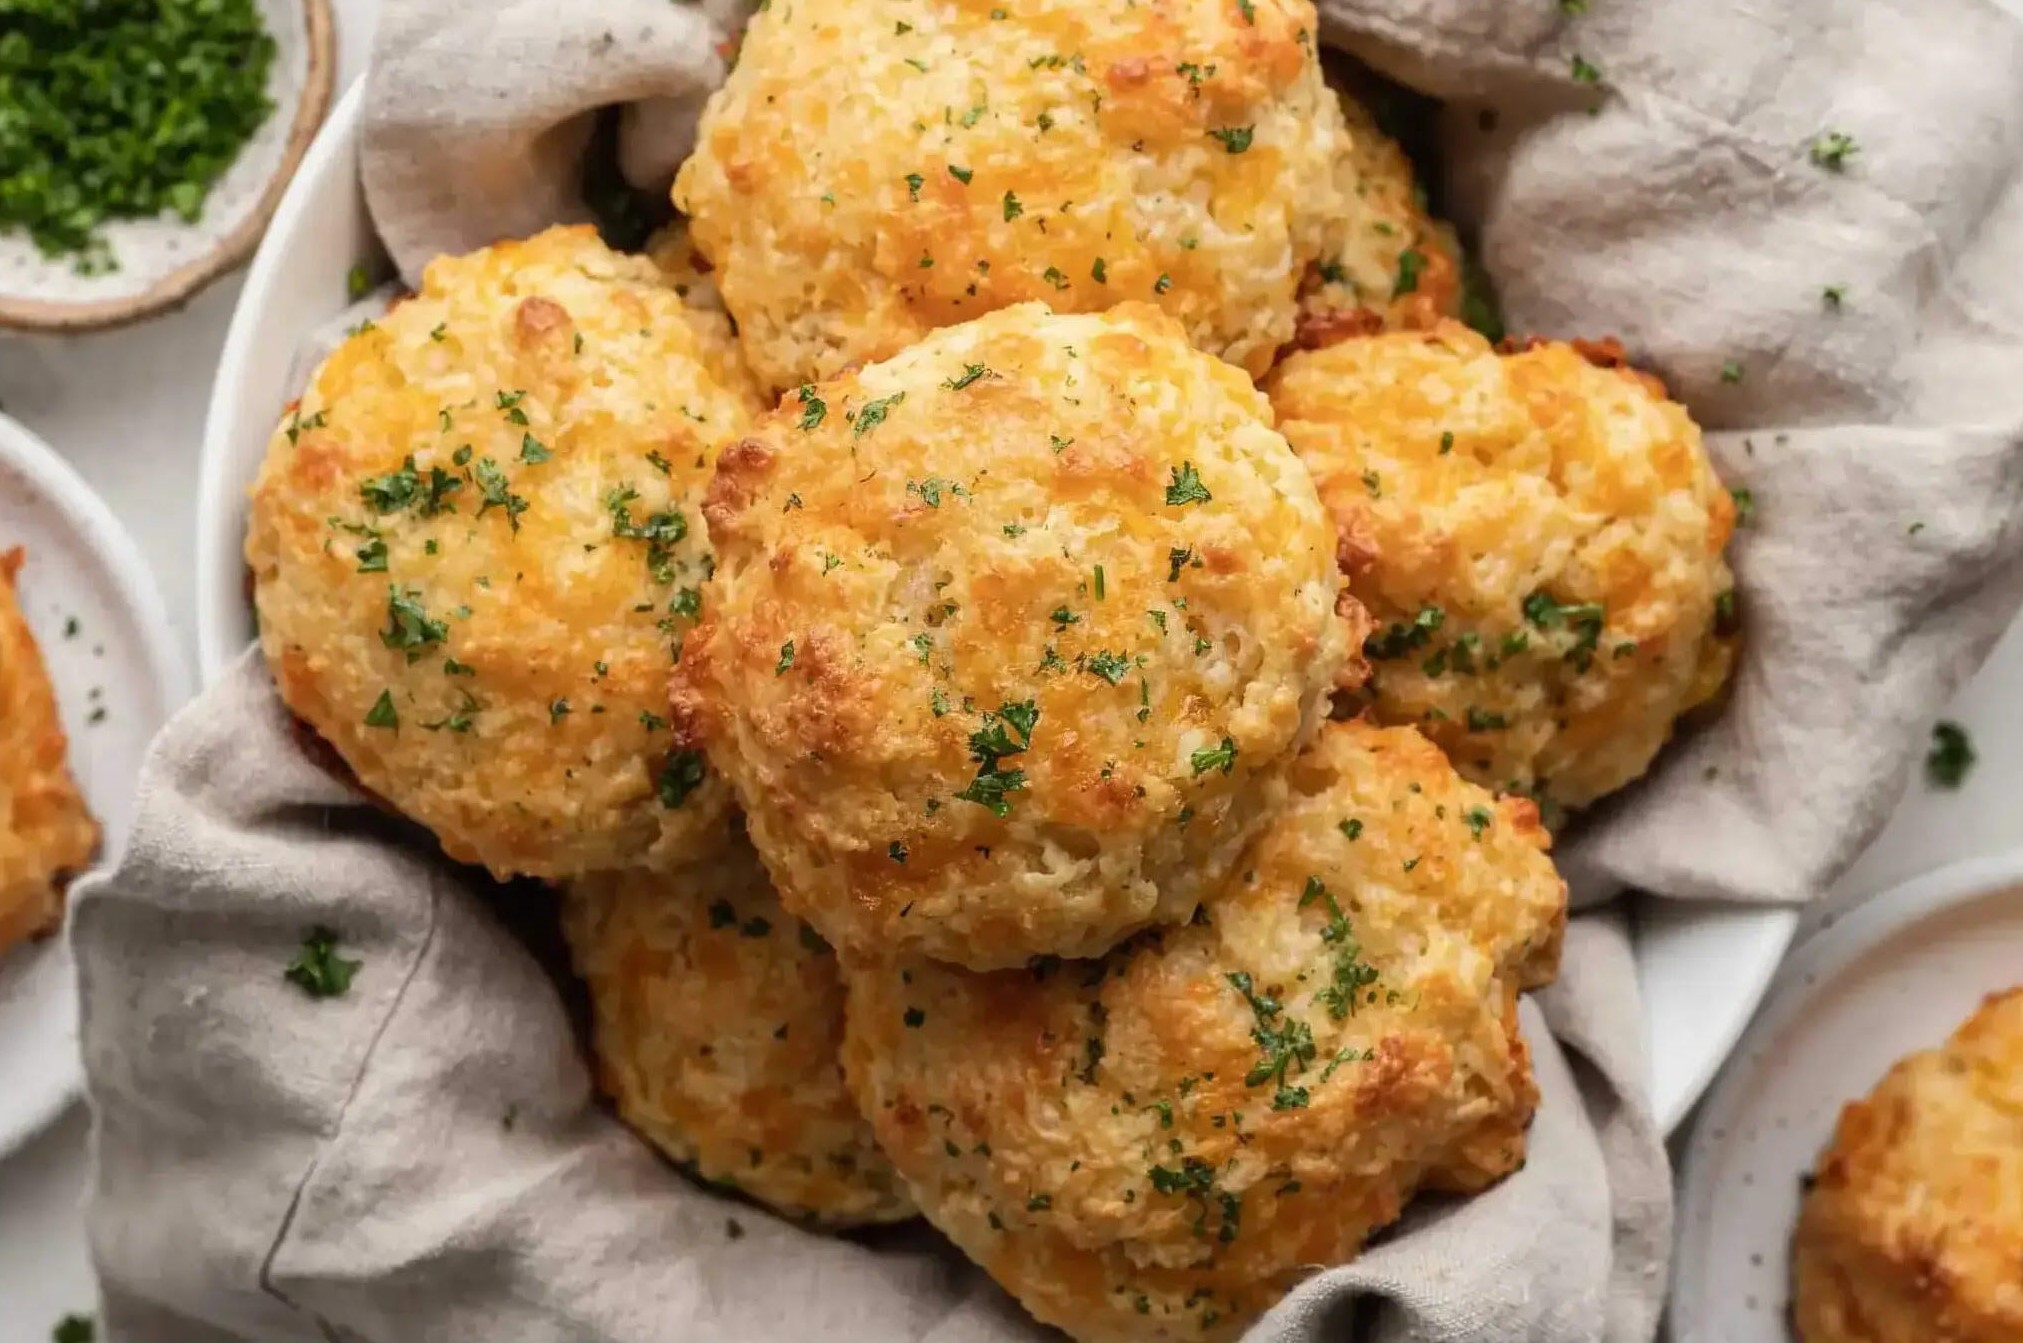 How To Store Cheddar Bay Biscuits